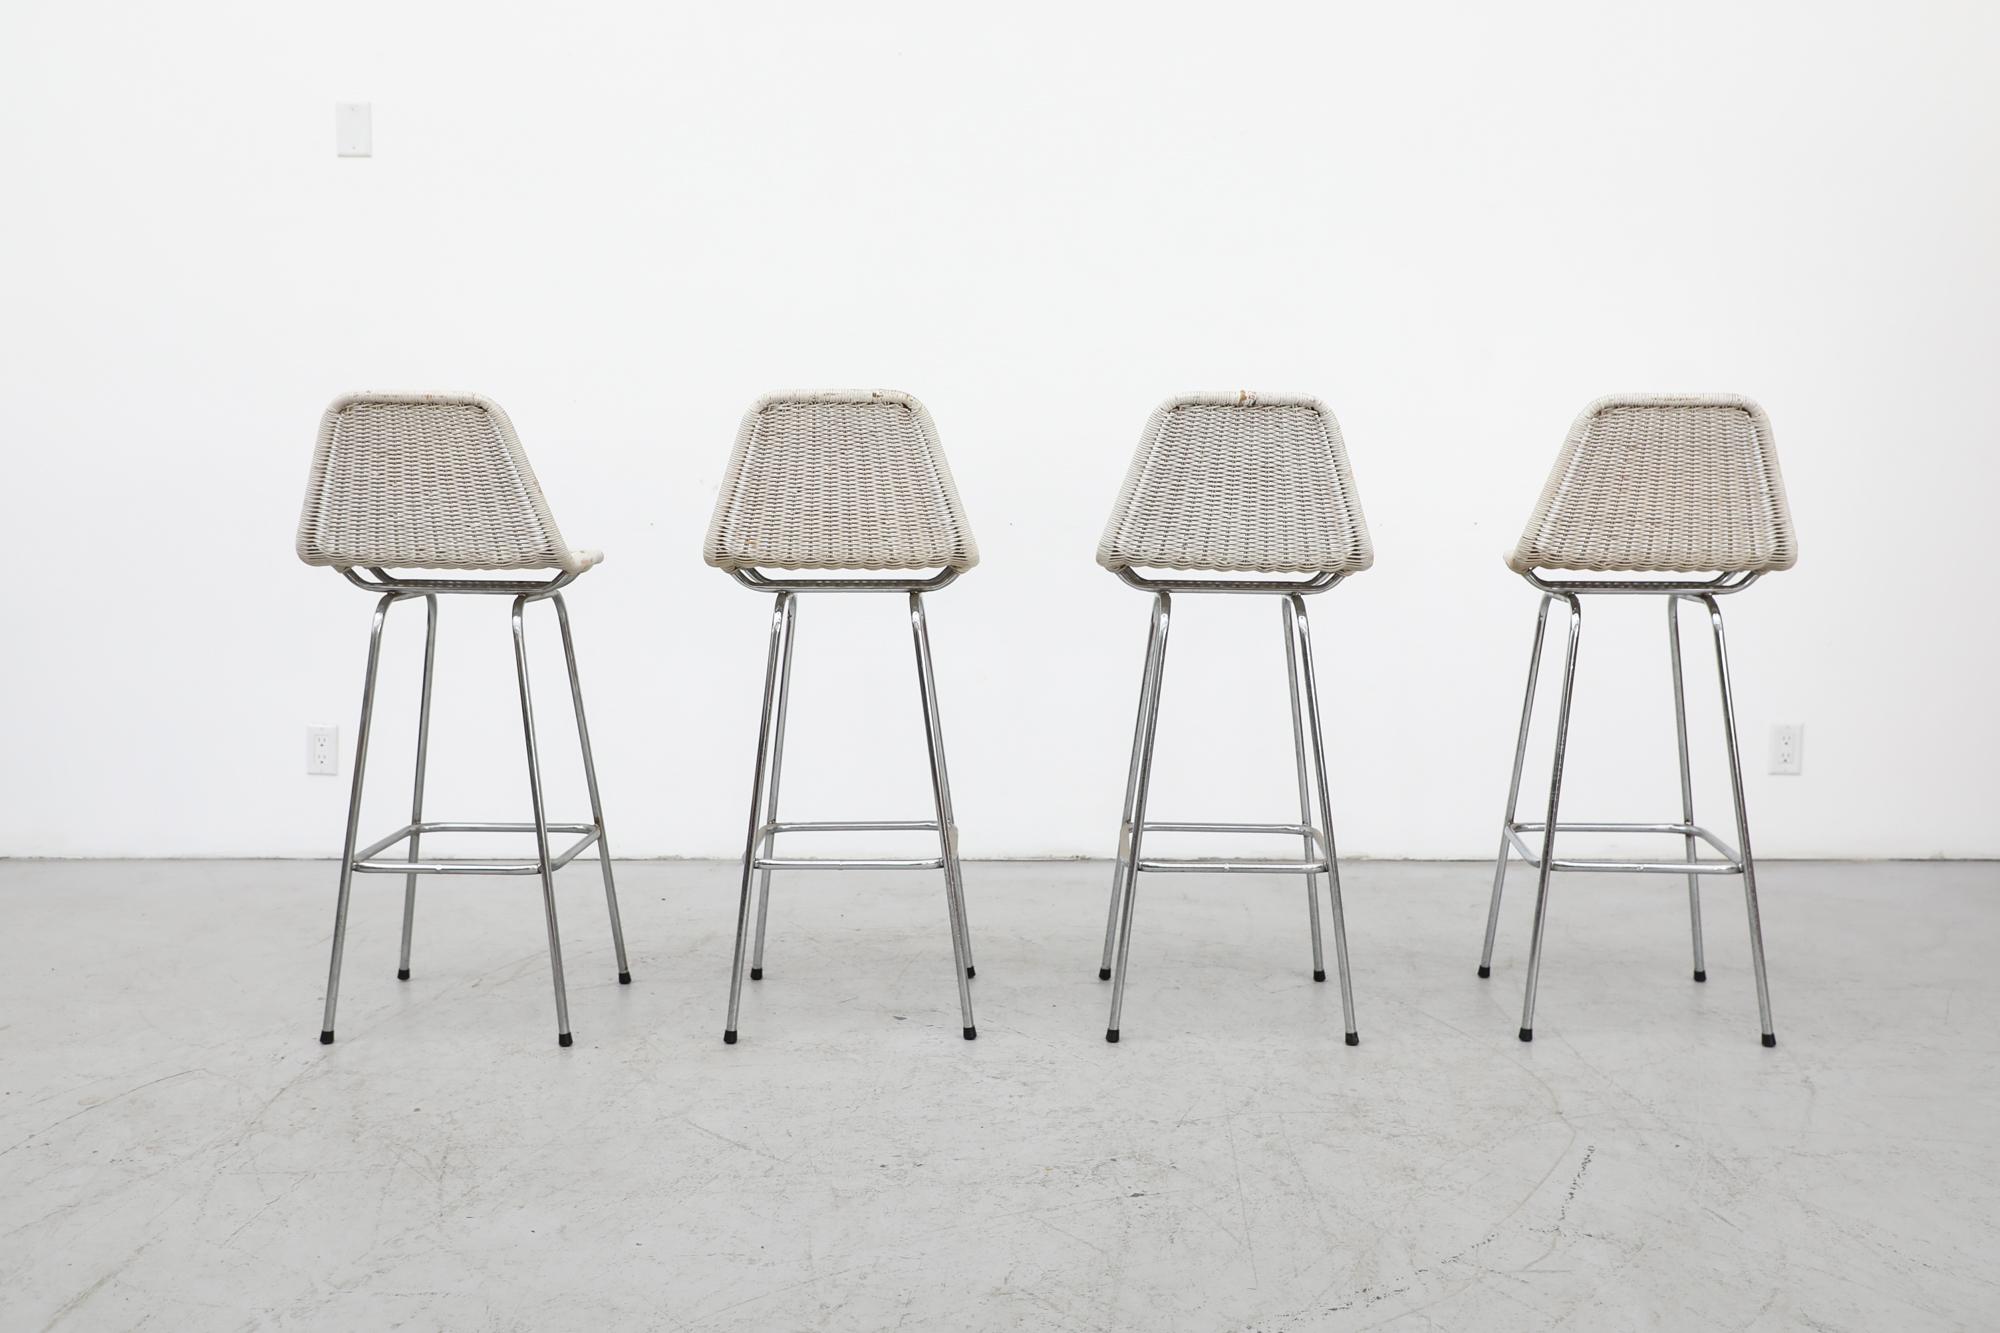 Dutch Set of 4 Charlotte Perriand Style Wicker Bar Height Stools with Chrome Legs For Sale